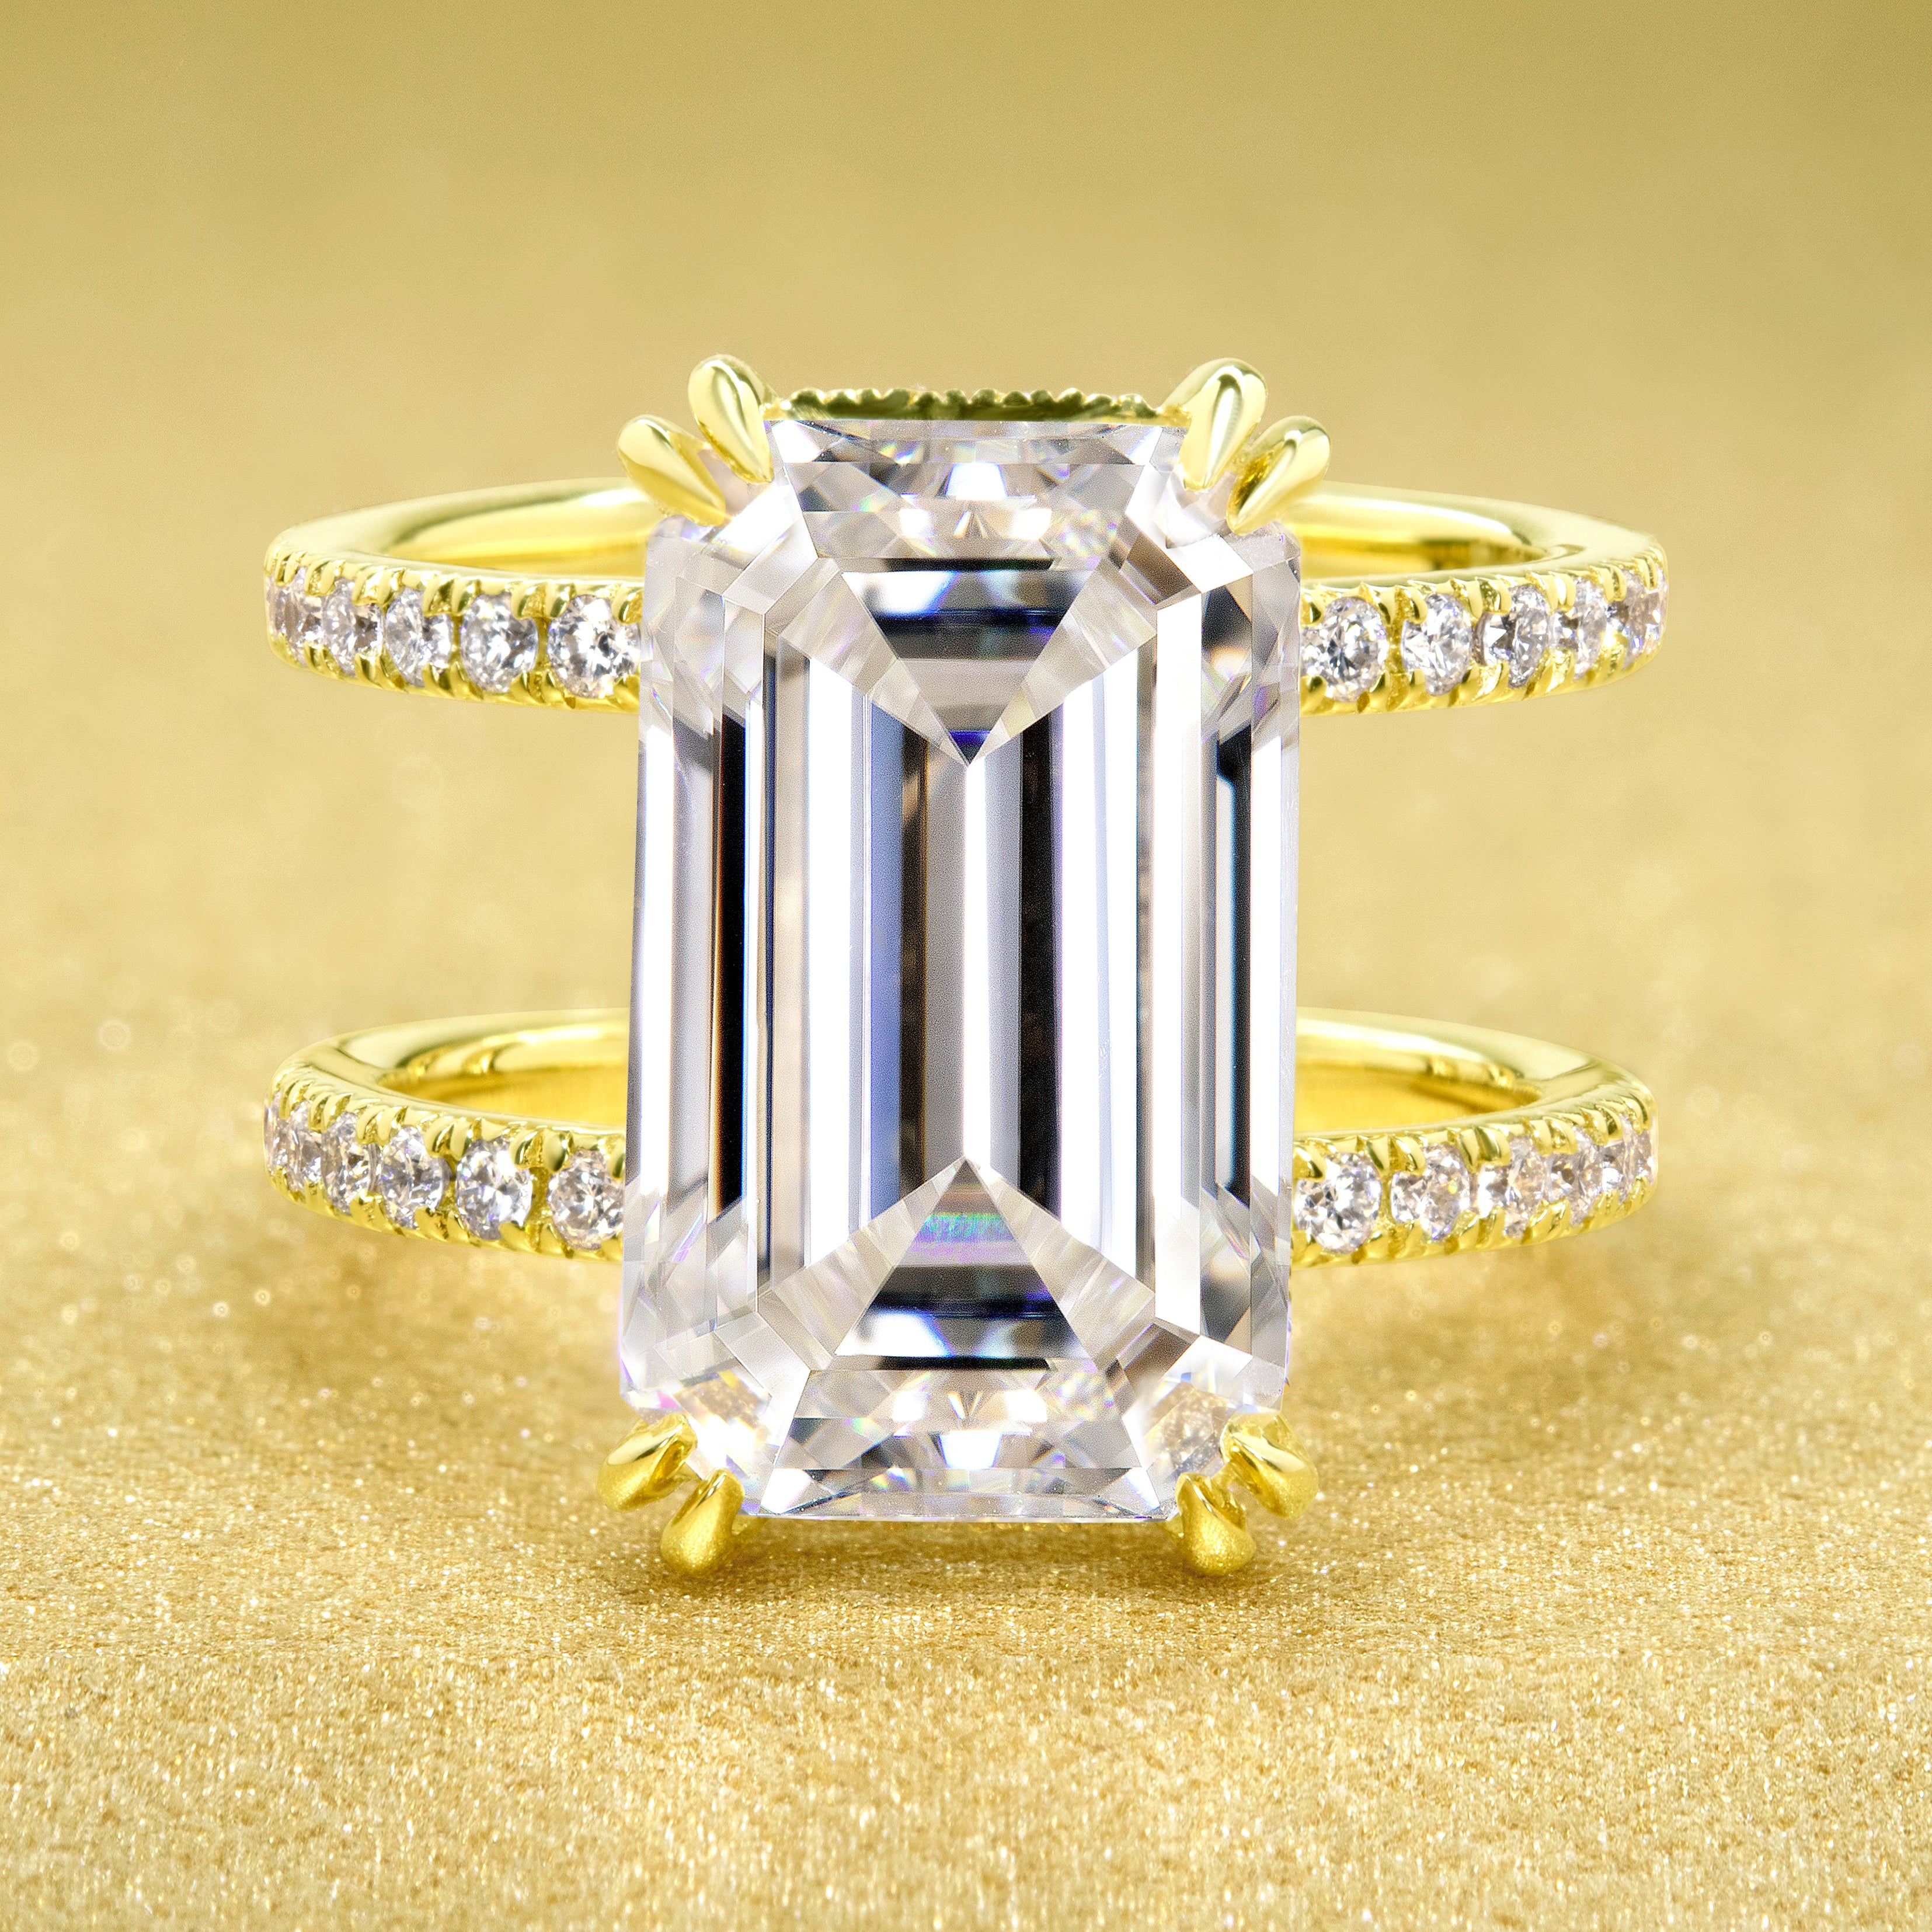 Browse through our newest engagement rings and bridal jewelry collections by Earthena